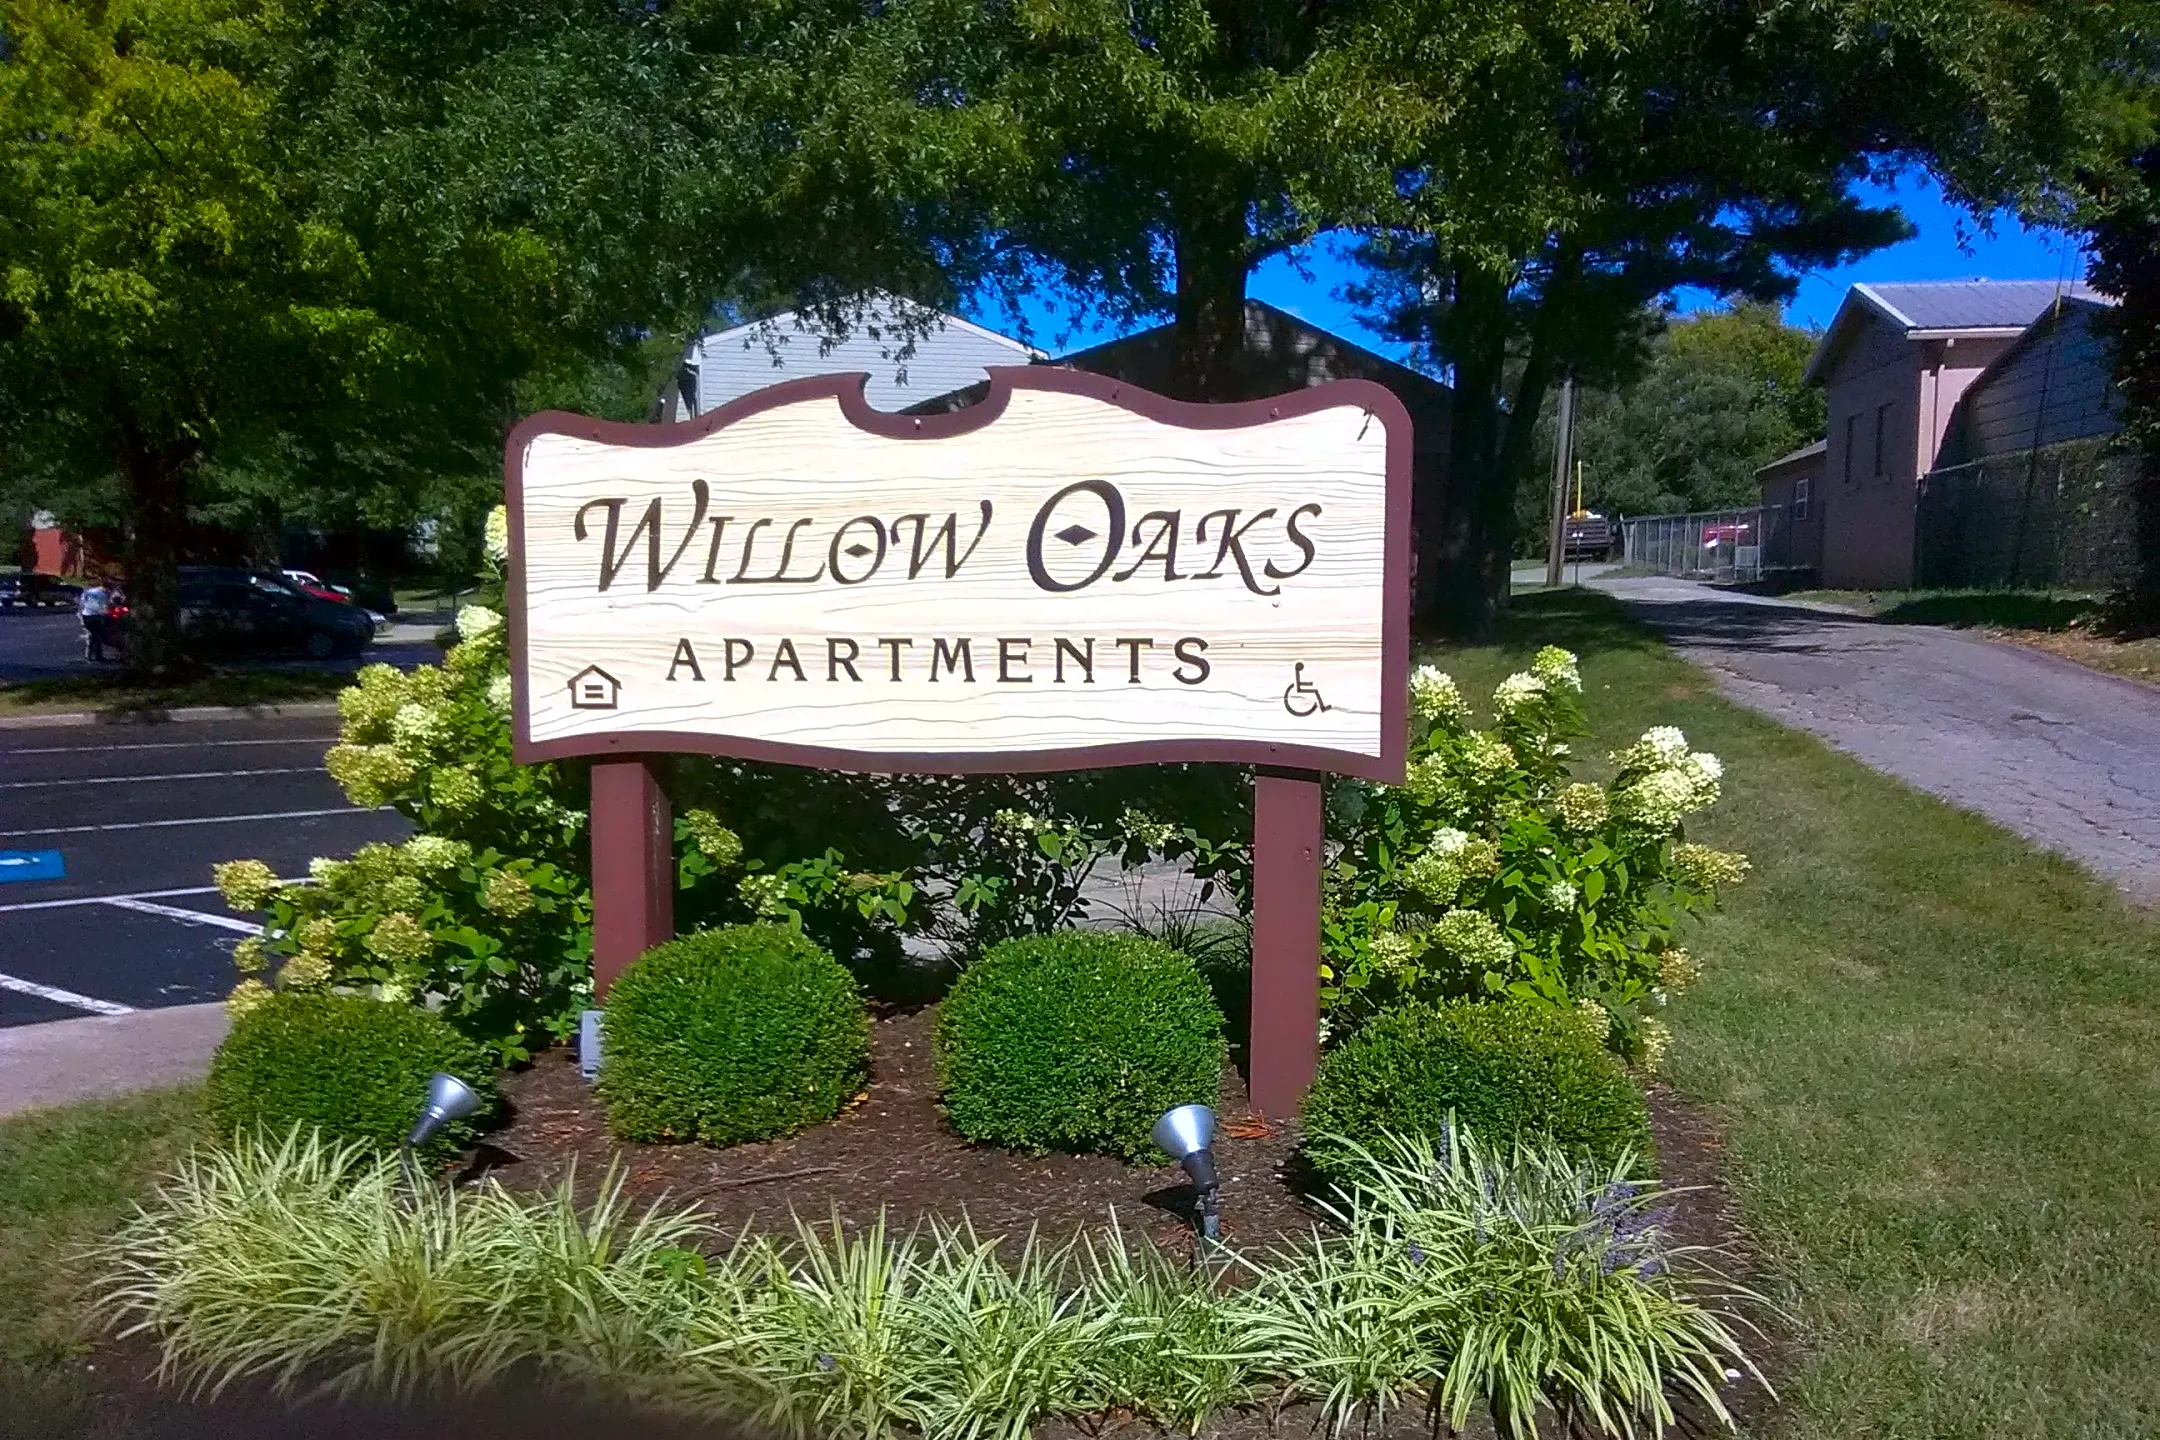 Pool - Willow Oaks Apartments - Versailles, KY